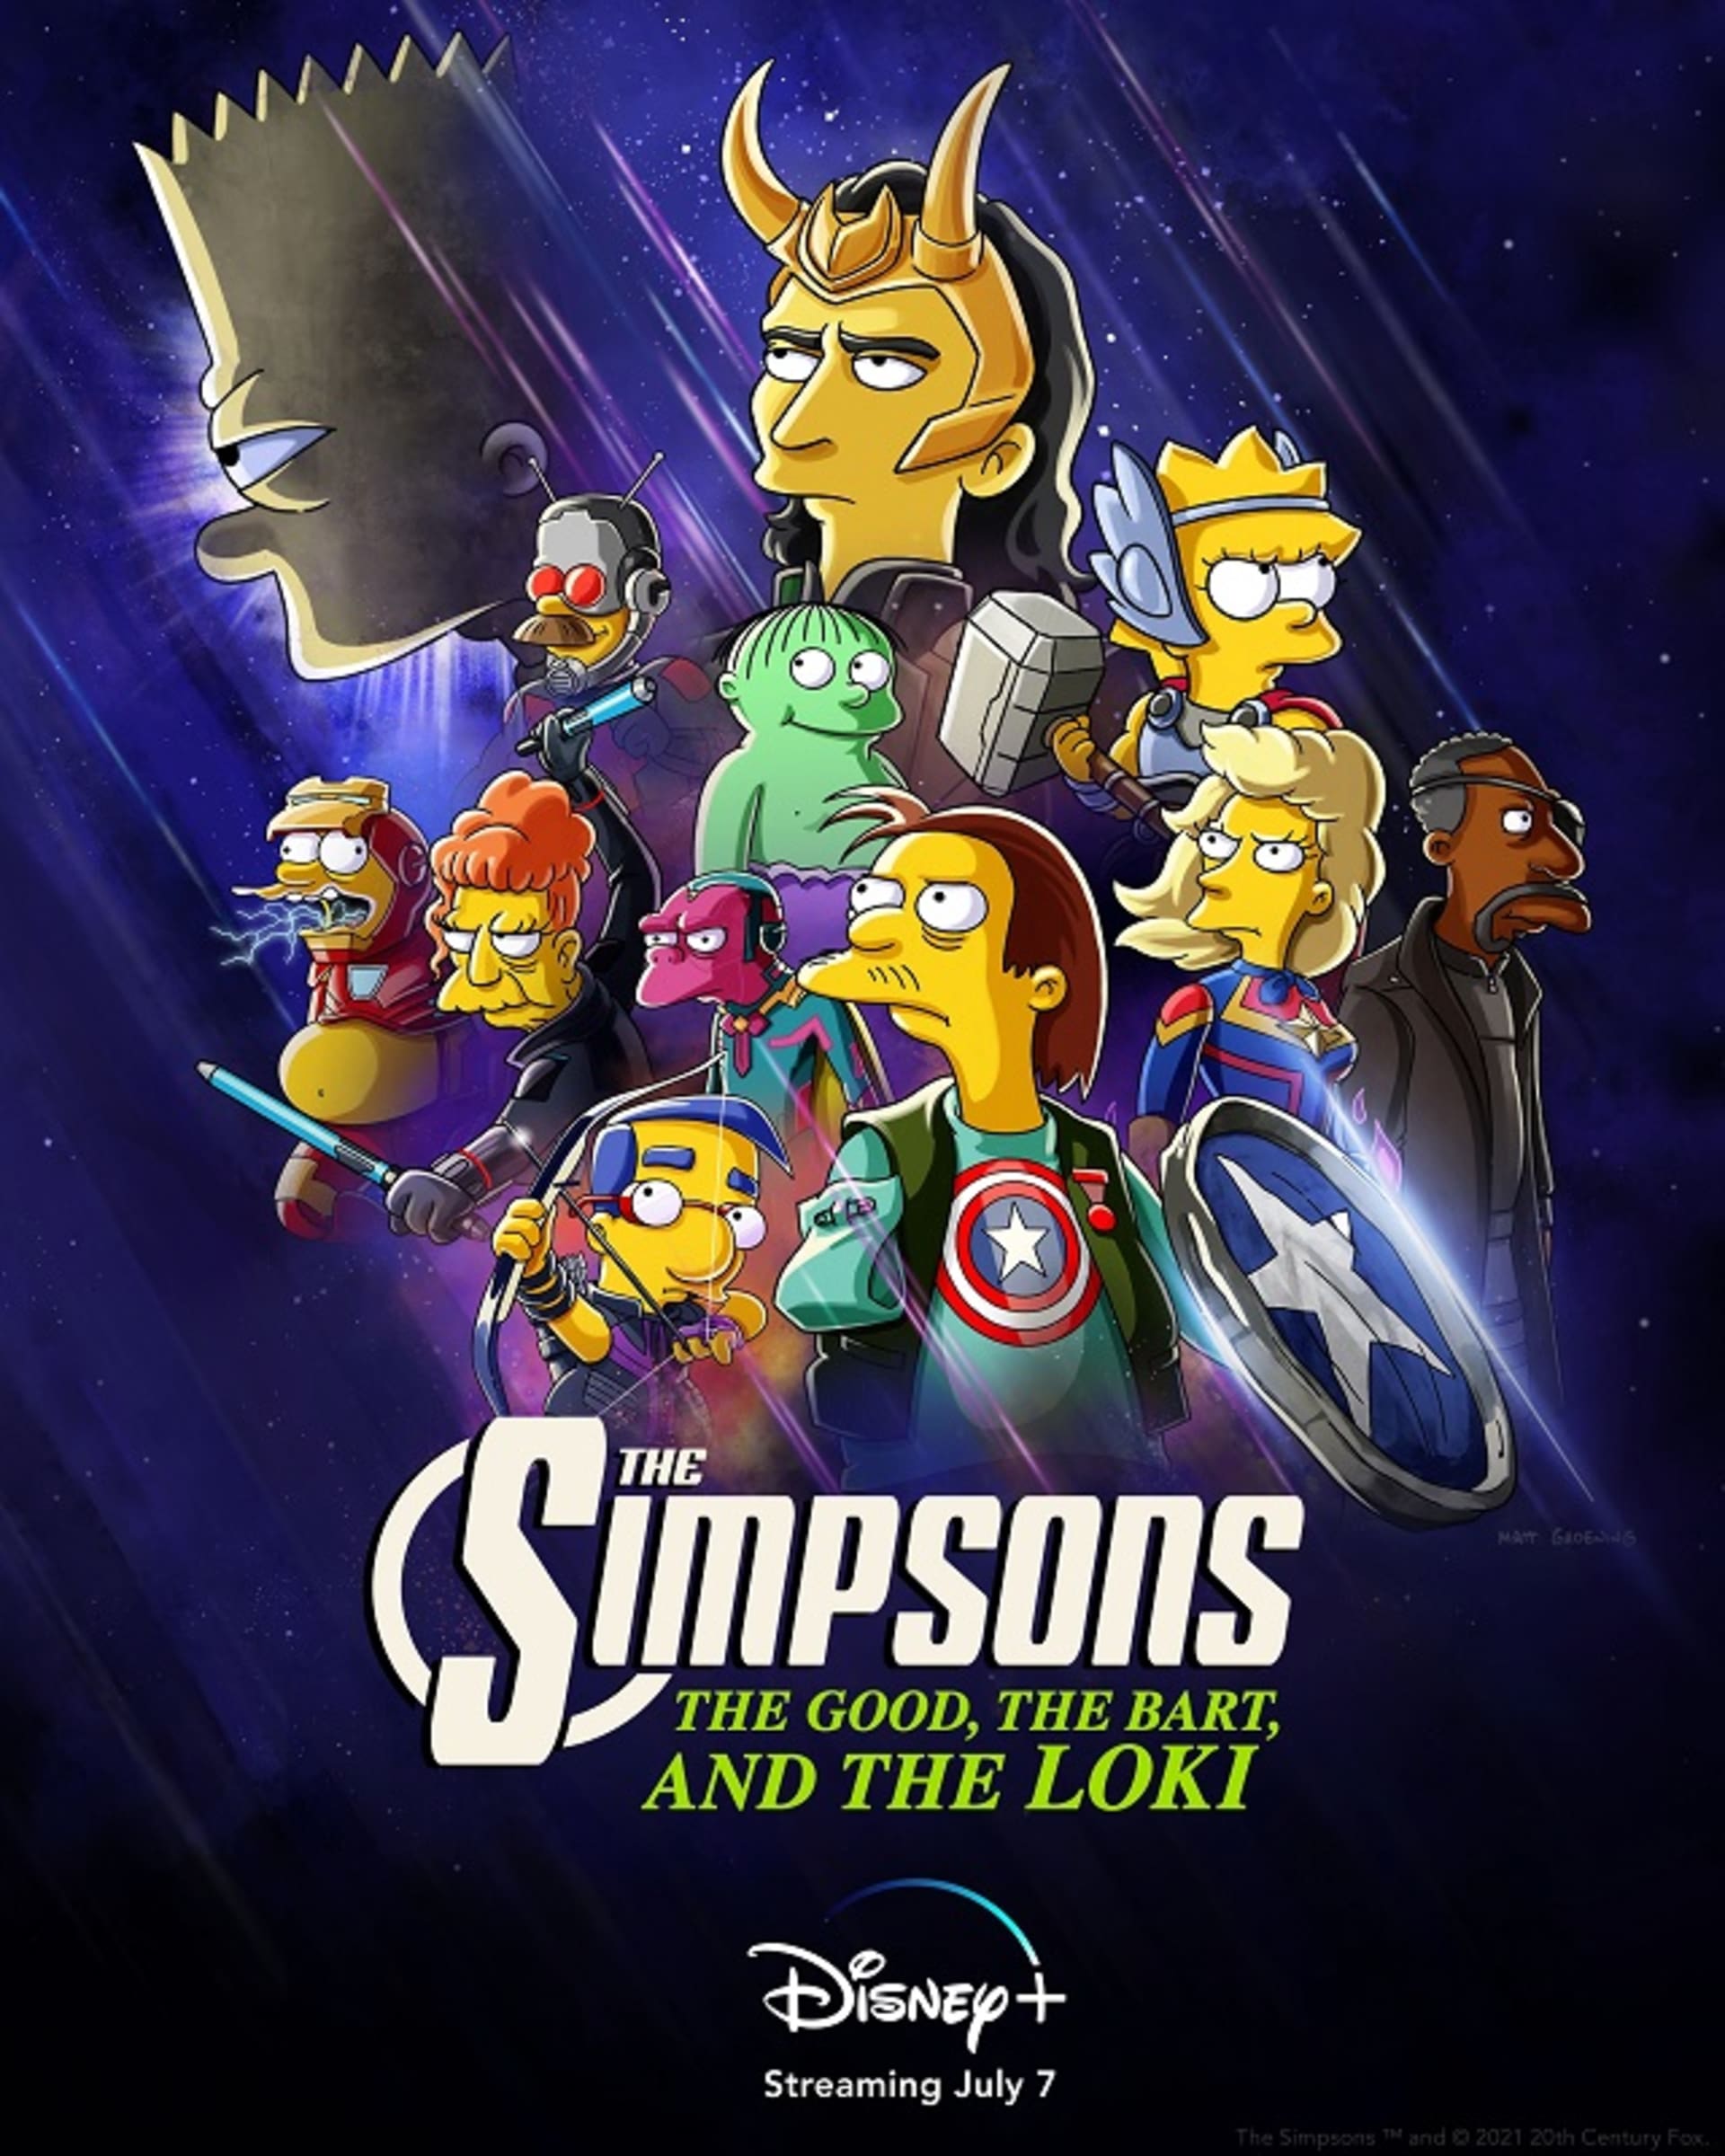 The Simpsons: The Good, The Bart, and The Loki